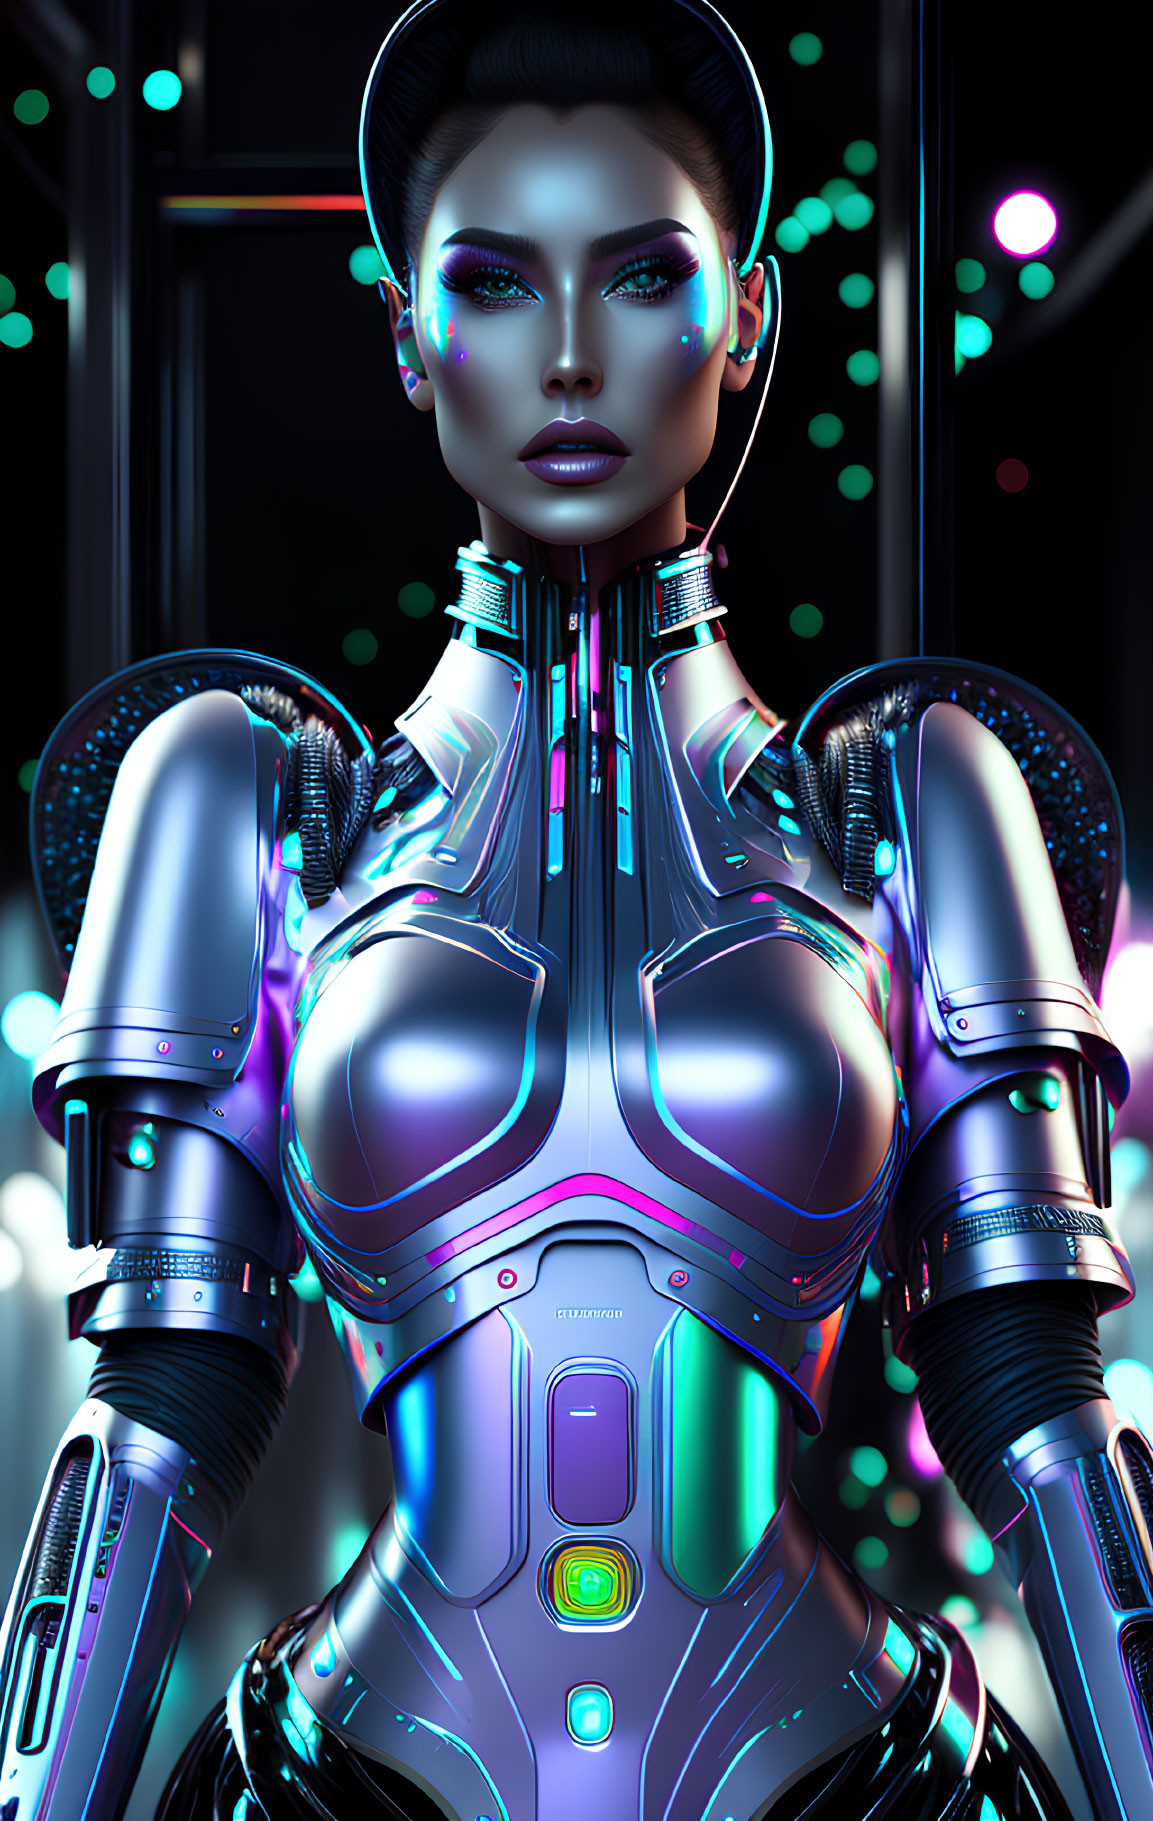 Reflective metallic female android with neon lights and cybernetic features in dark setting